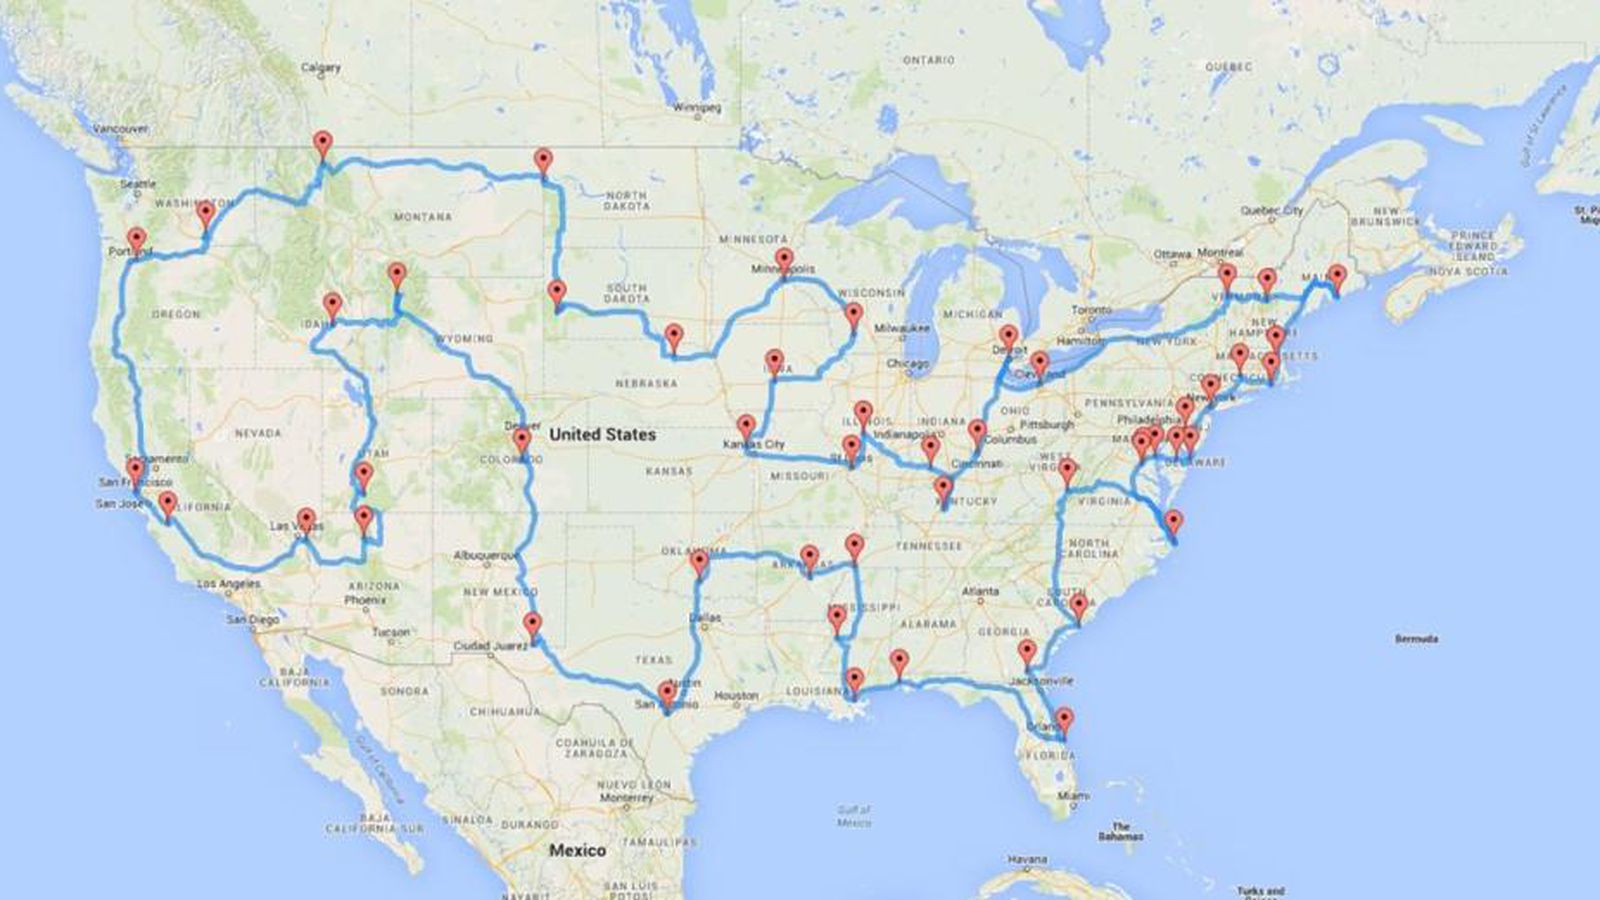 The Ultimate U.S. Road Trip, According to a Data Scientist Curbed